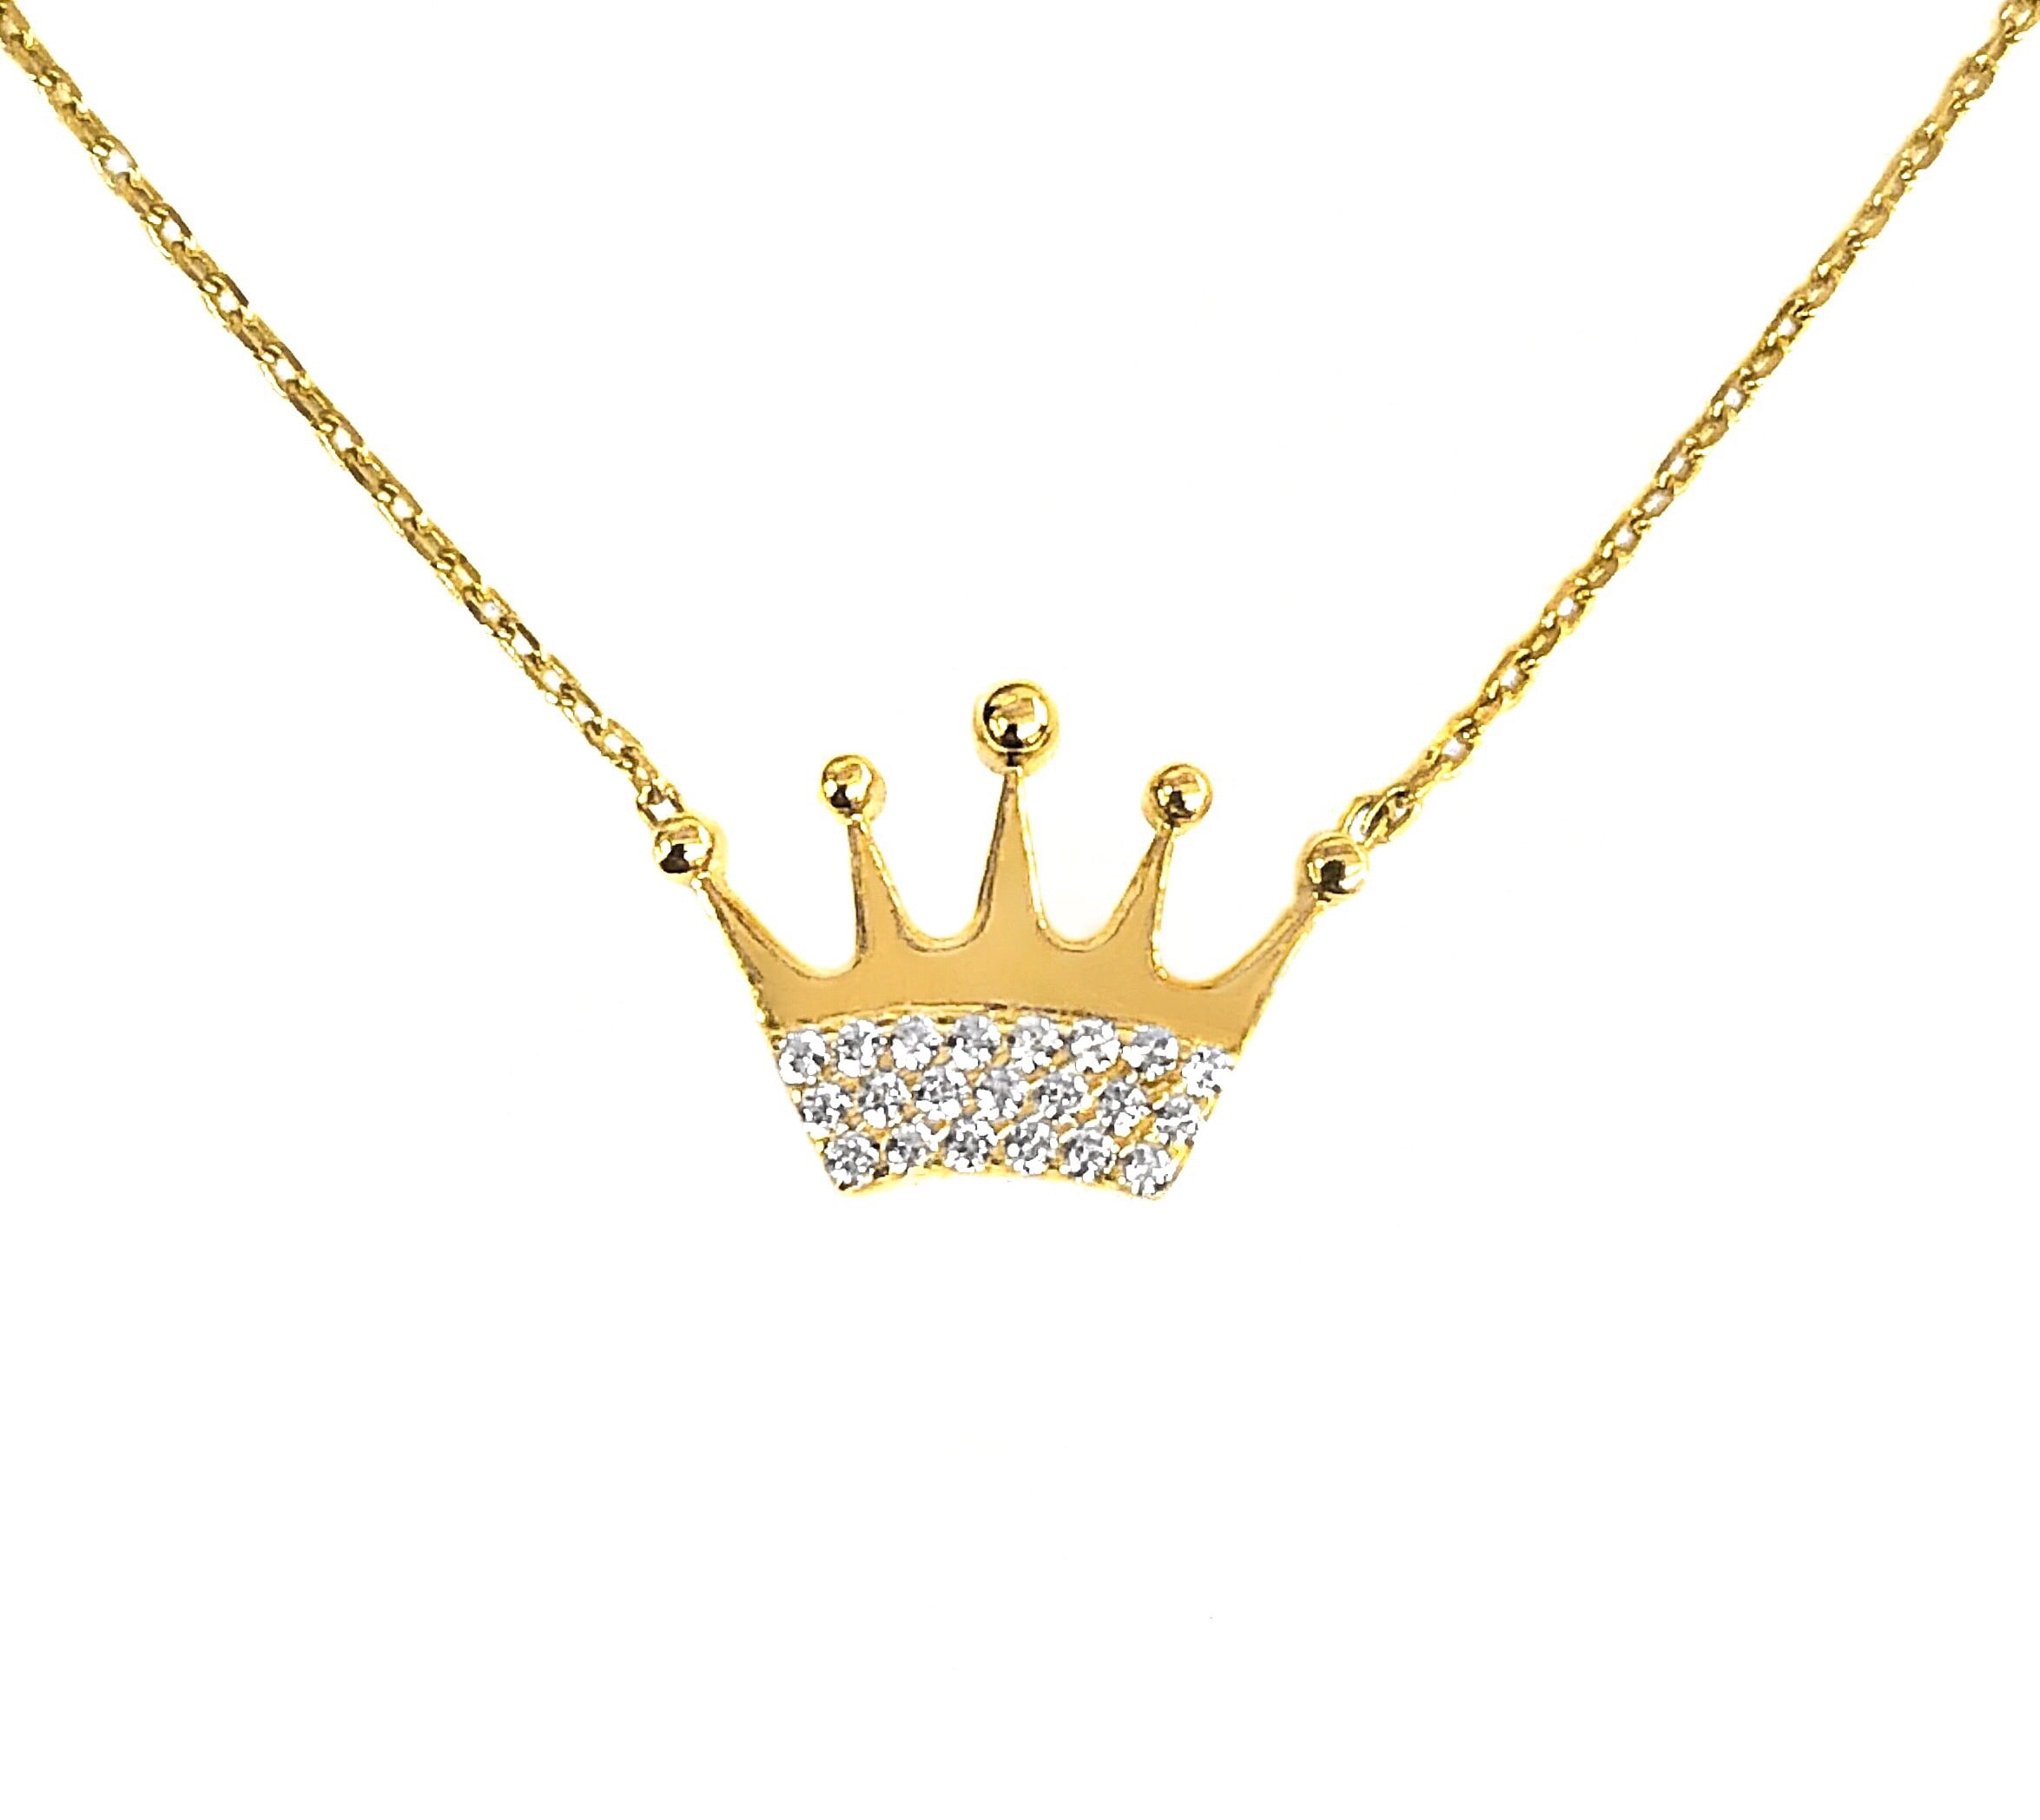 14K YELLOW GOLD FLOATING PAVE CROWN NECKLACE